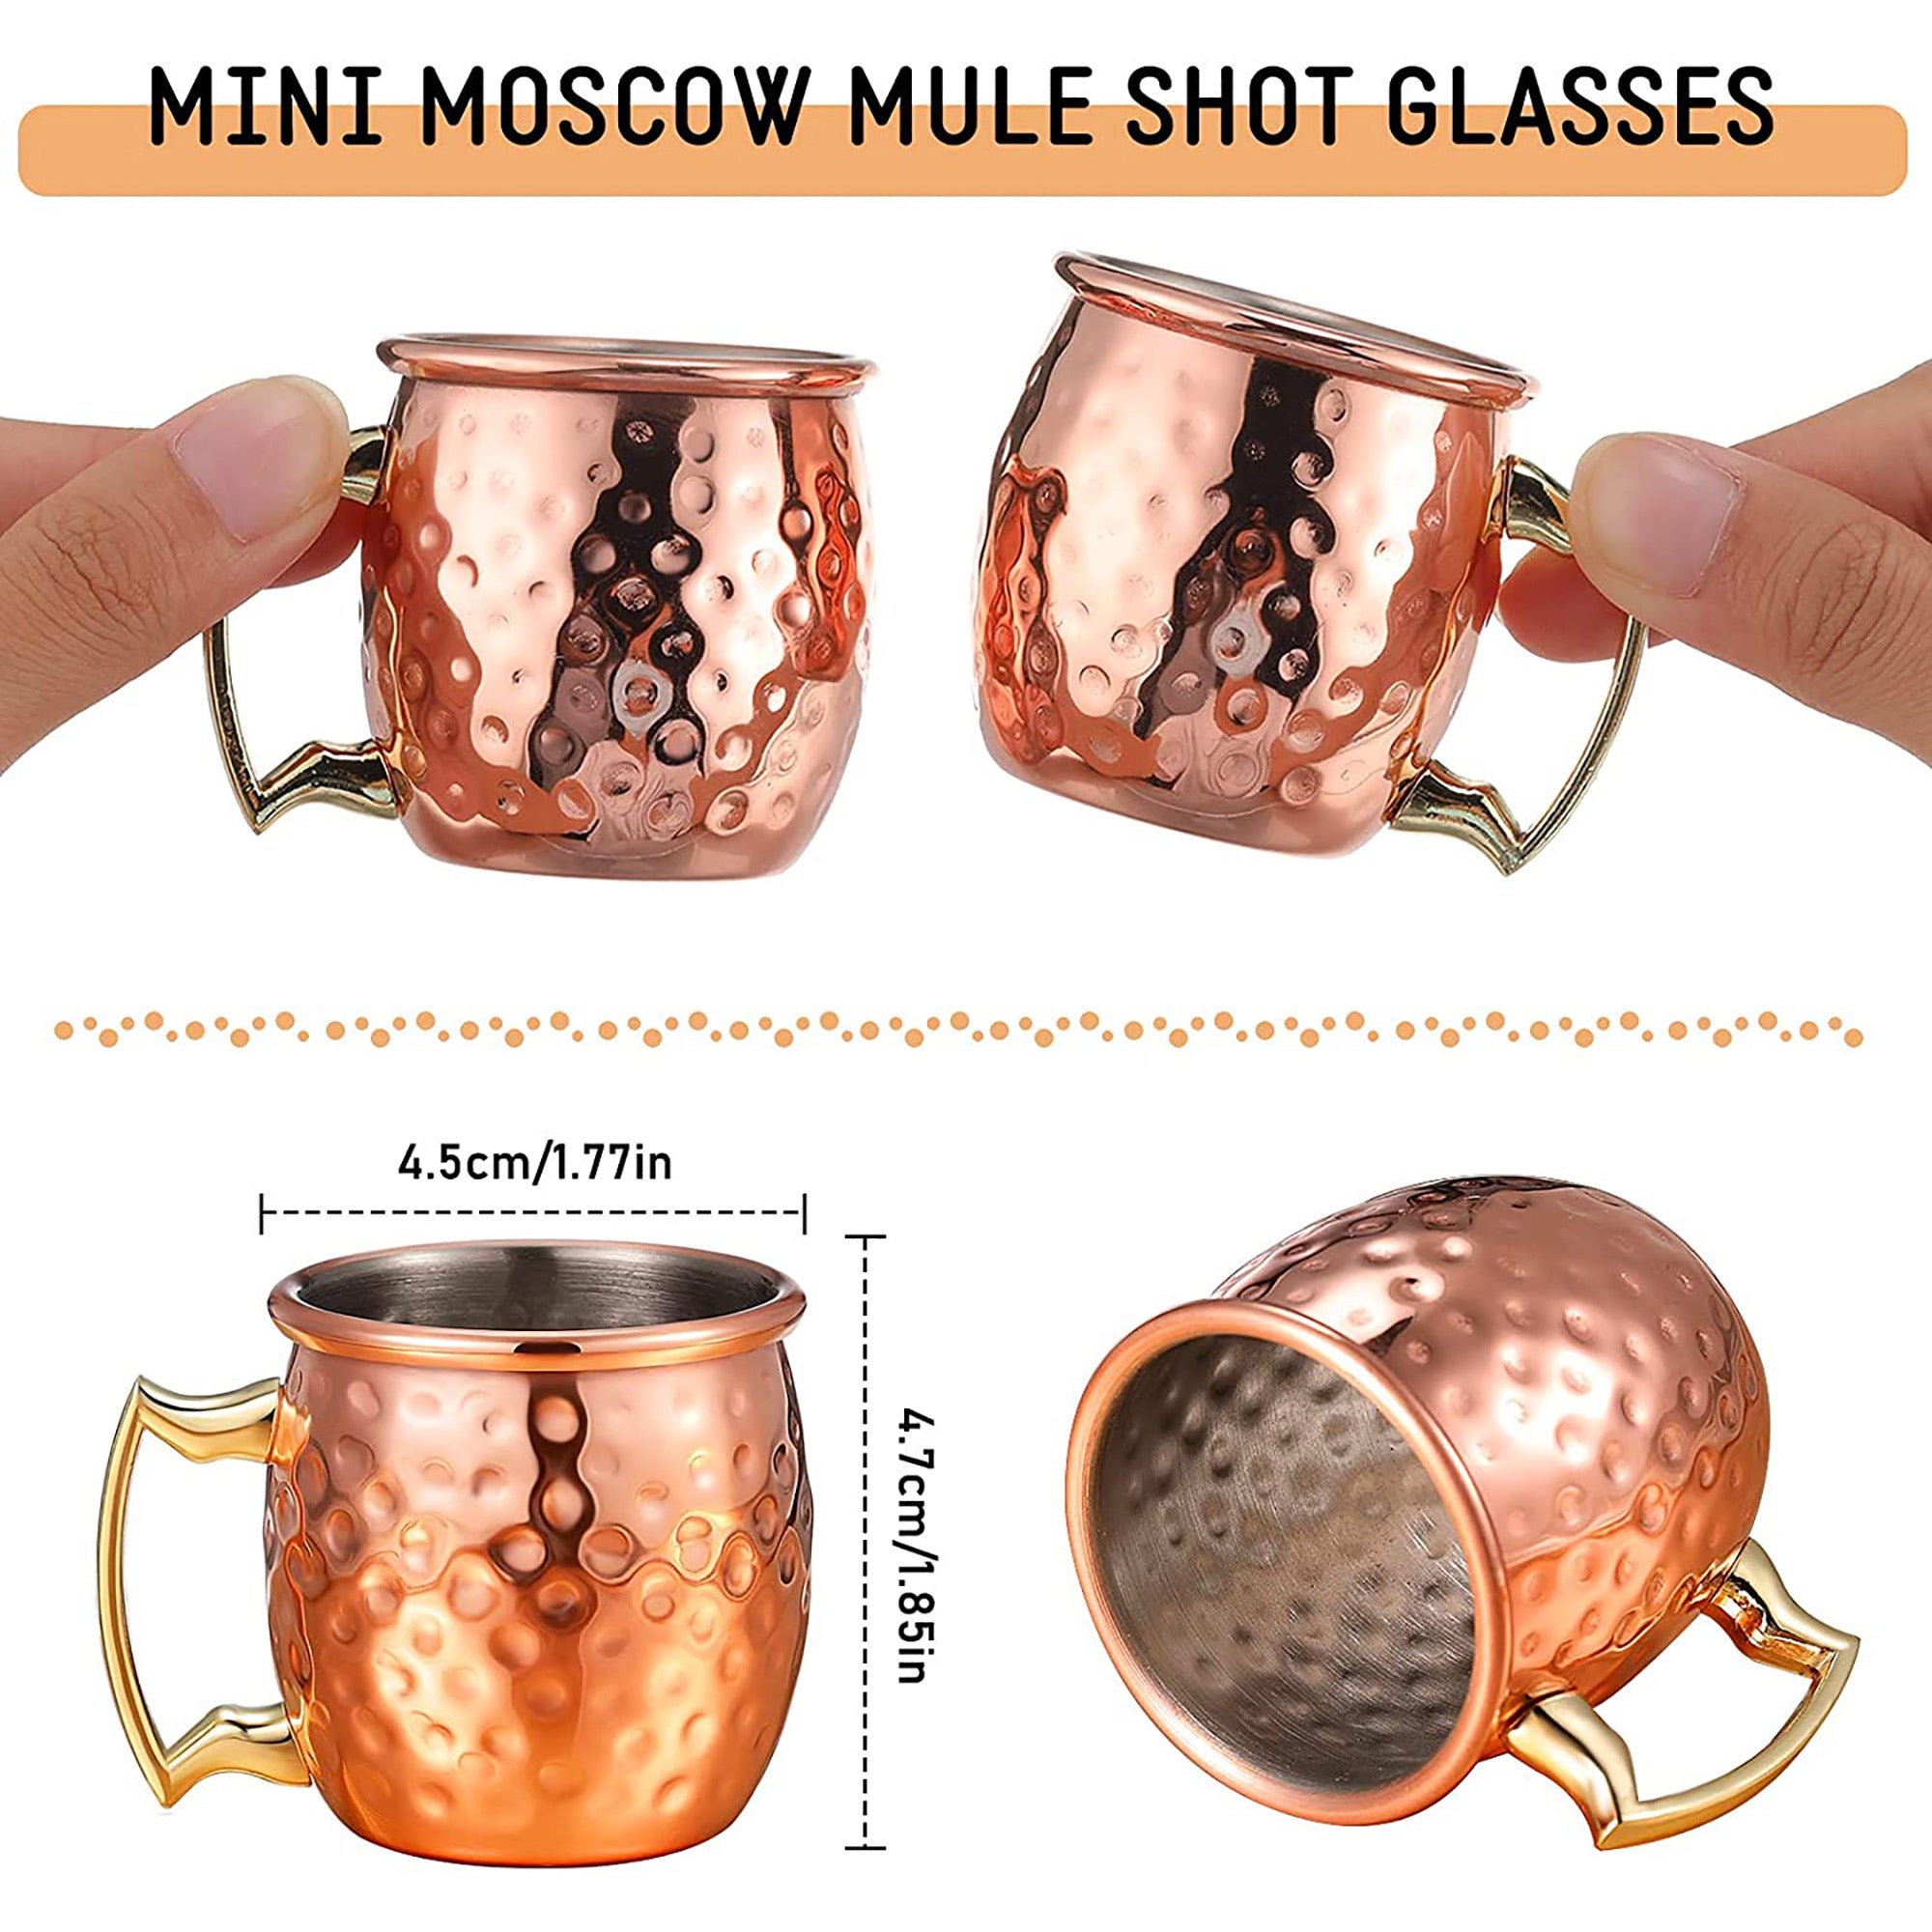 6 Pieces with Stand Mini Moscow Mugs 2 oz Mule Shot Glasses for Home, Kitchen, Bar Drinkaware Home Deco Home party gift anniversary